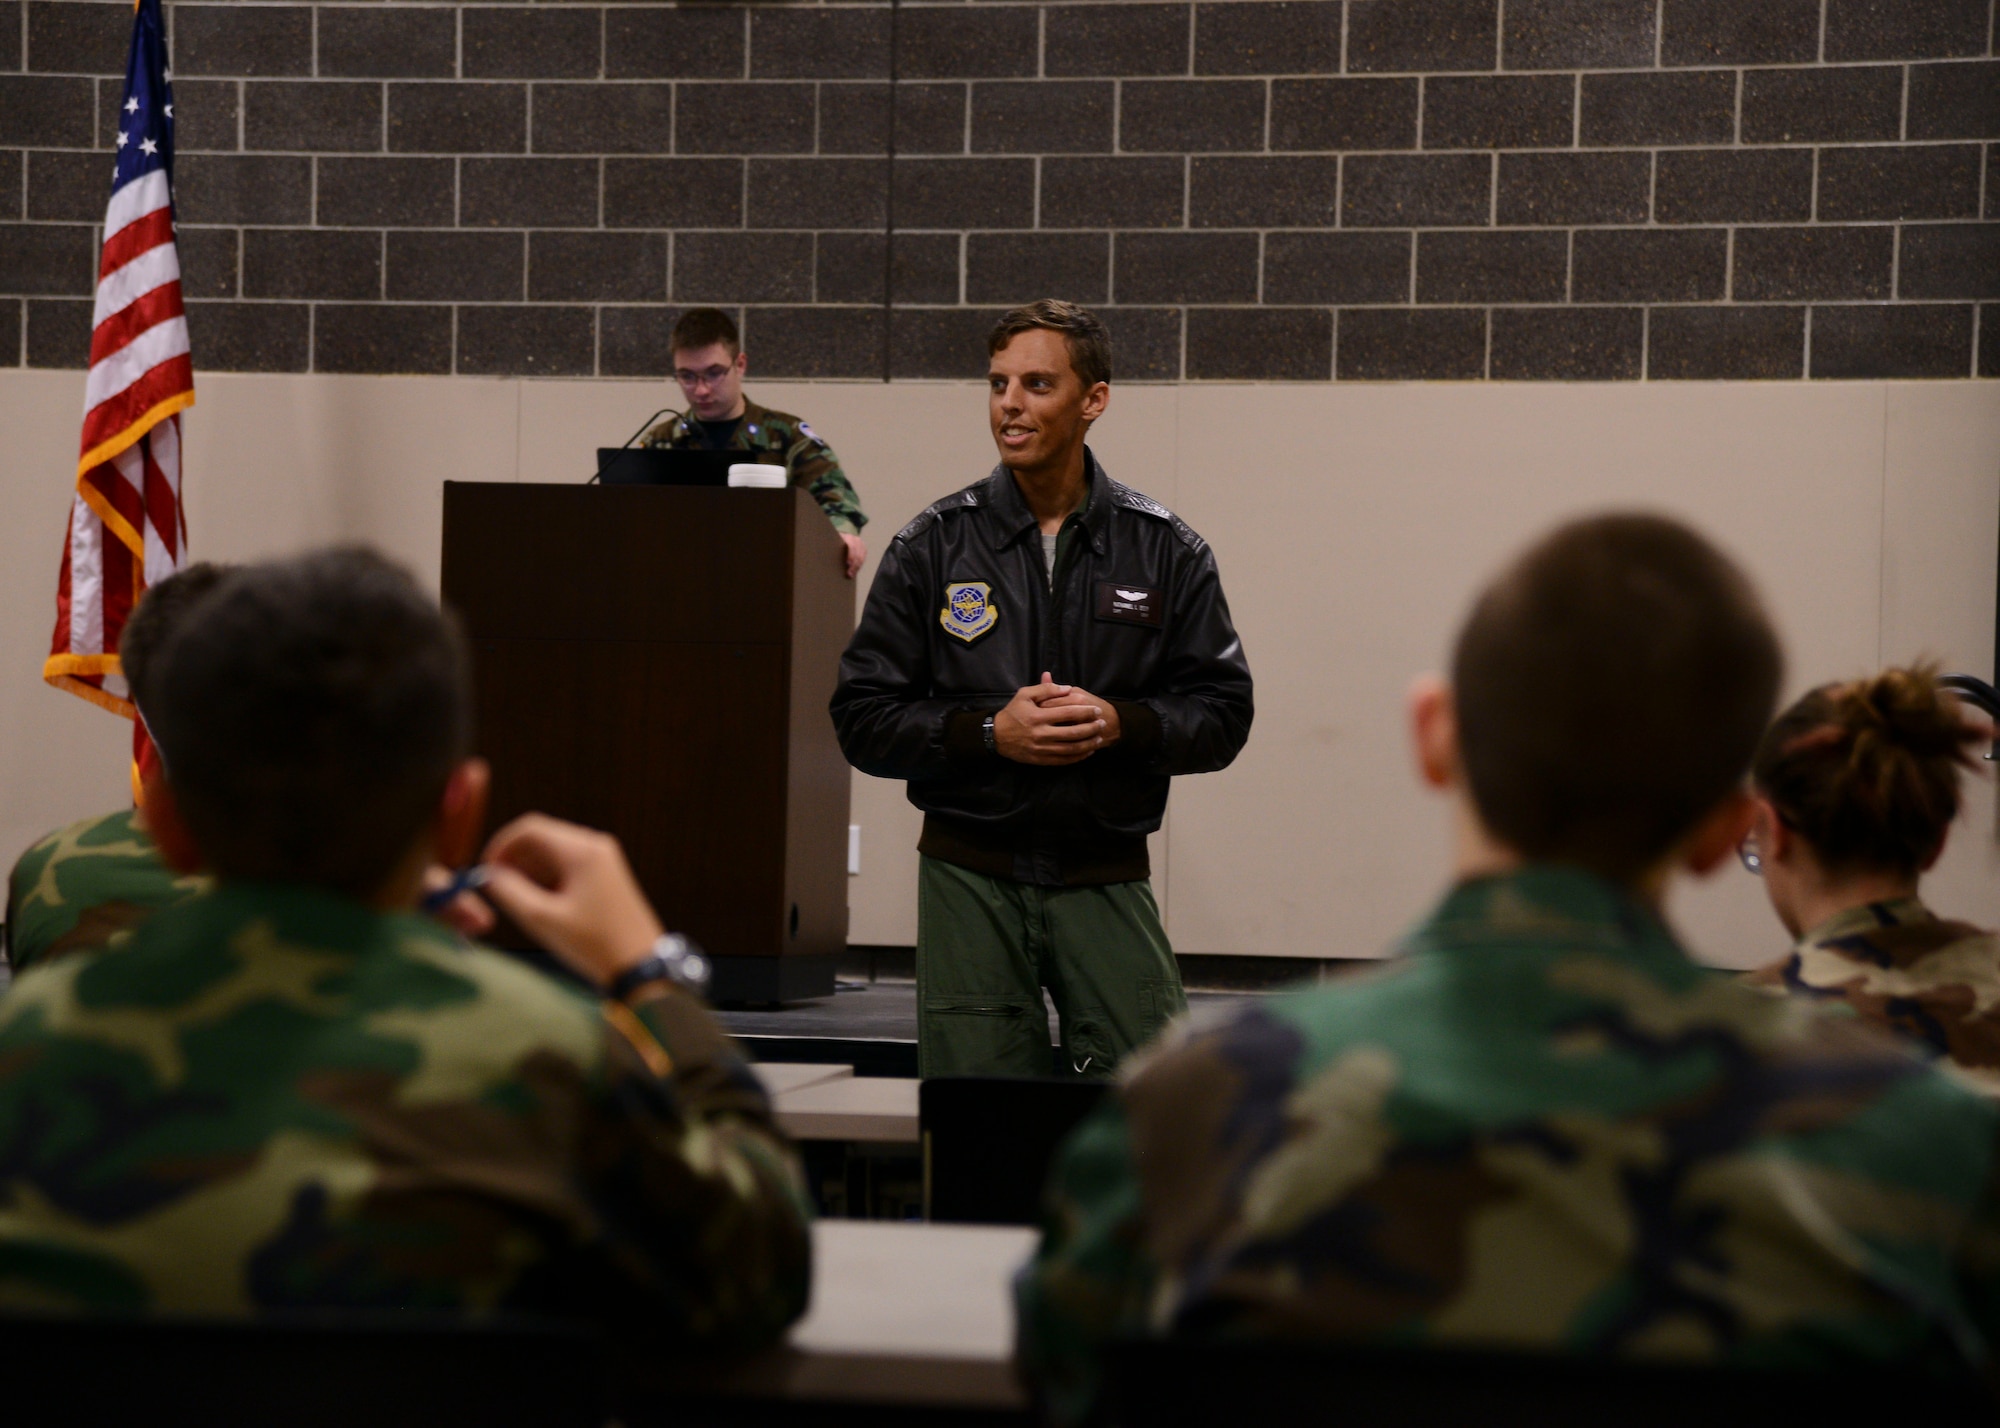 Capt. Nathanial Beer, 384th Air Refueling Squadron pilot, speaks to cadets at the Emerald City Composite Squadron, Jan. 14, 2016, in Wichita, Kan. Beer volunteers with the local Civil Air Patrol to give back to the same program that helped him follow his dreams of becoming a pilot. (U.S. Air Force photo/Airman 1st Class Christopher Thornbury)